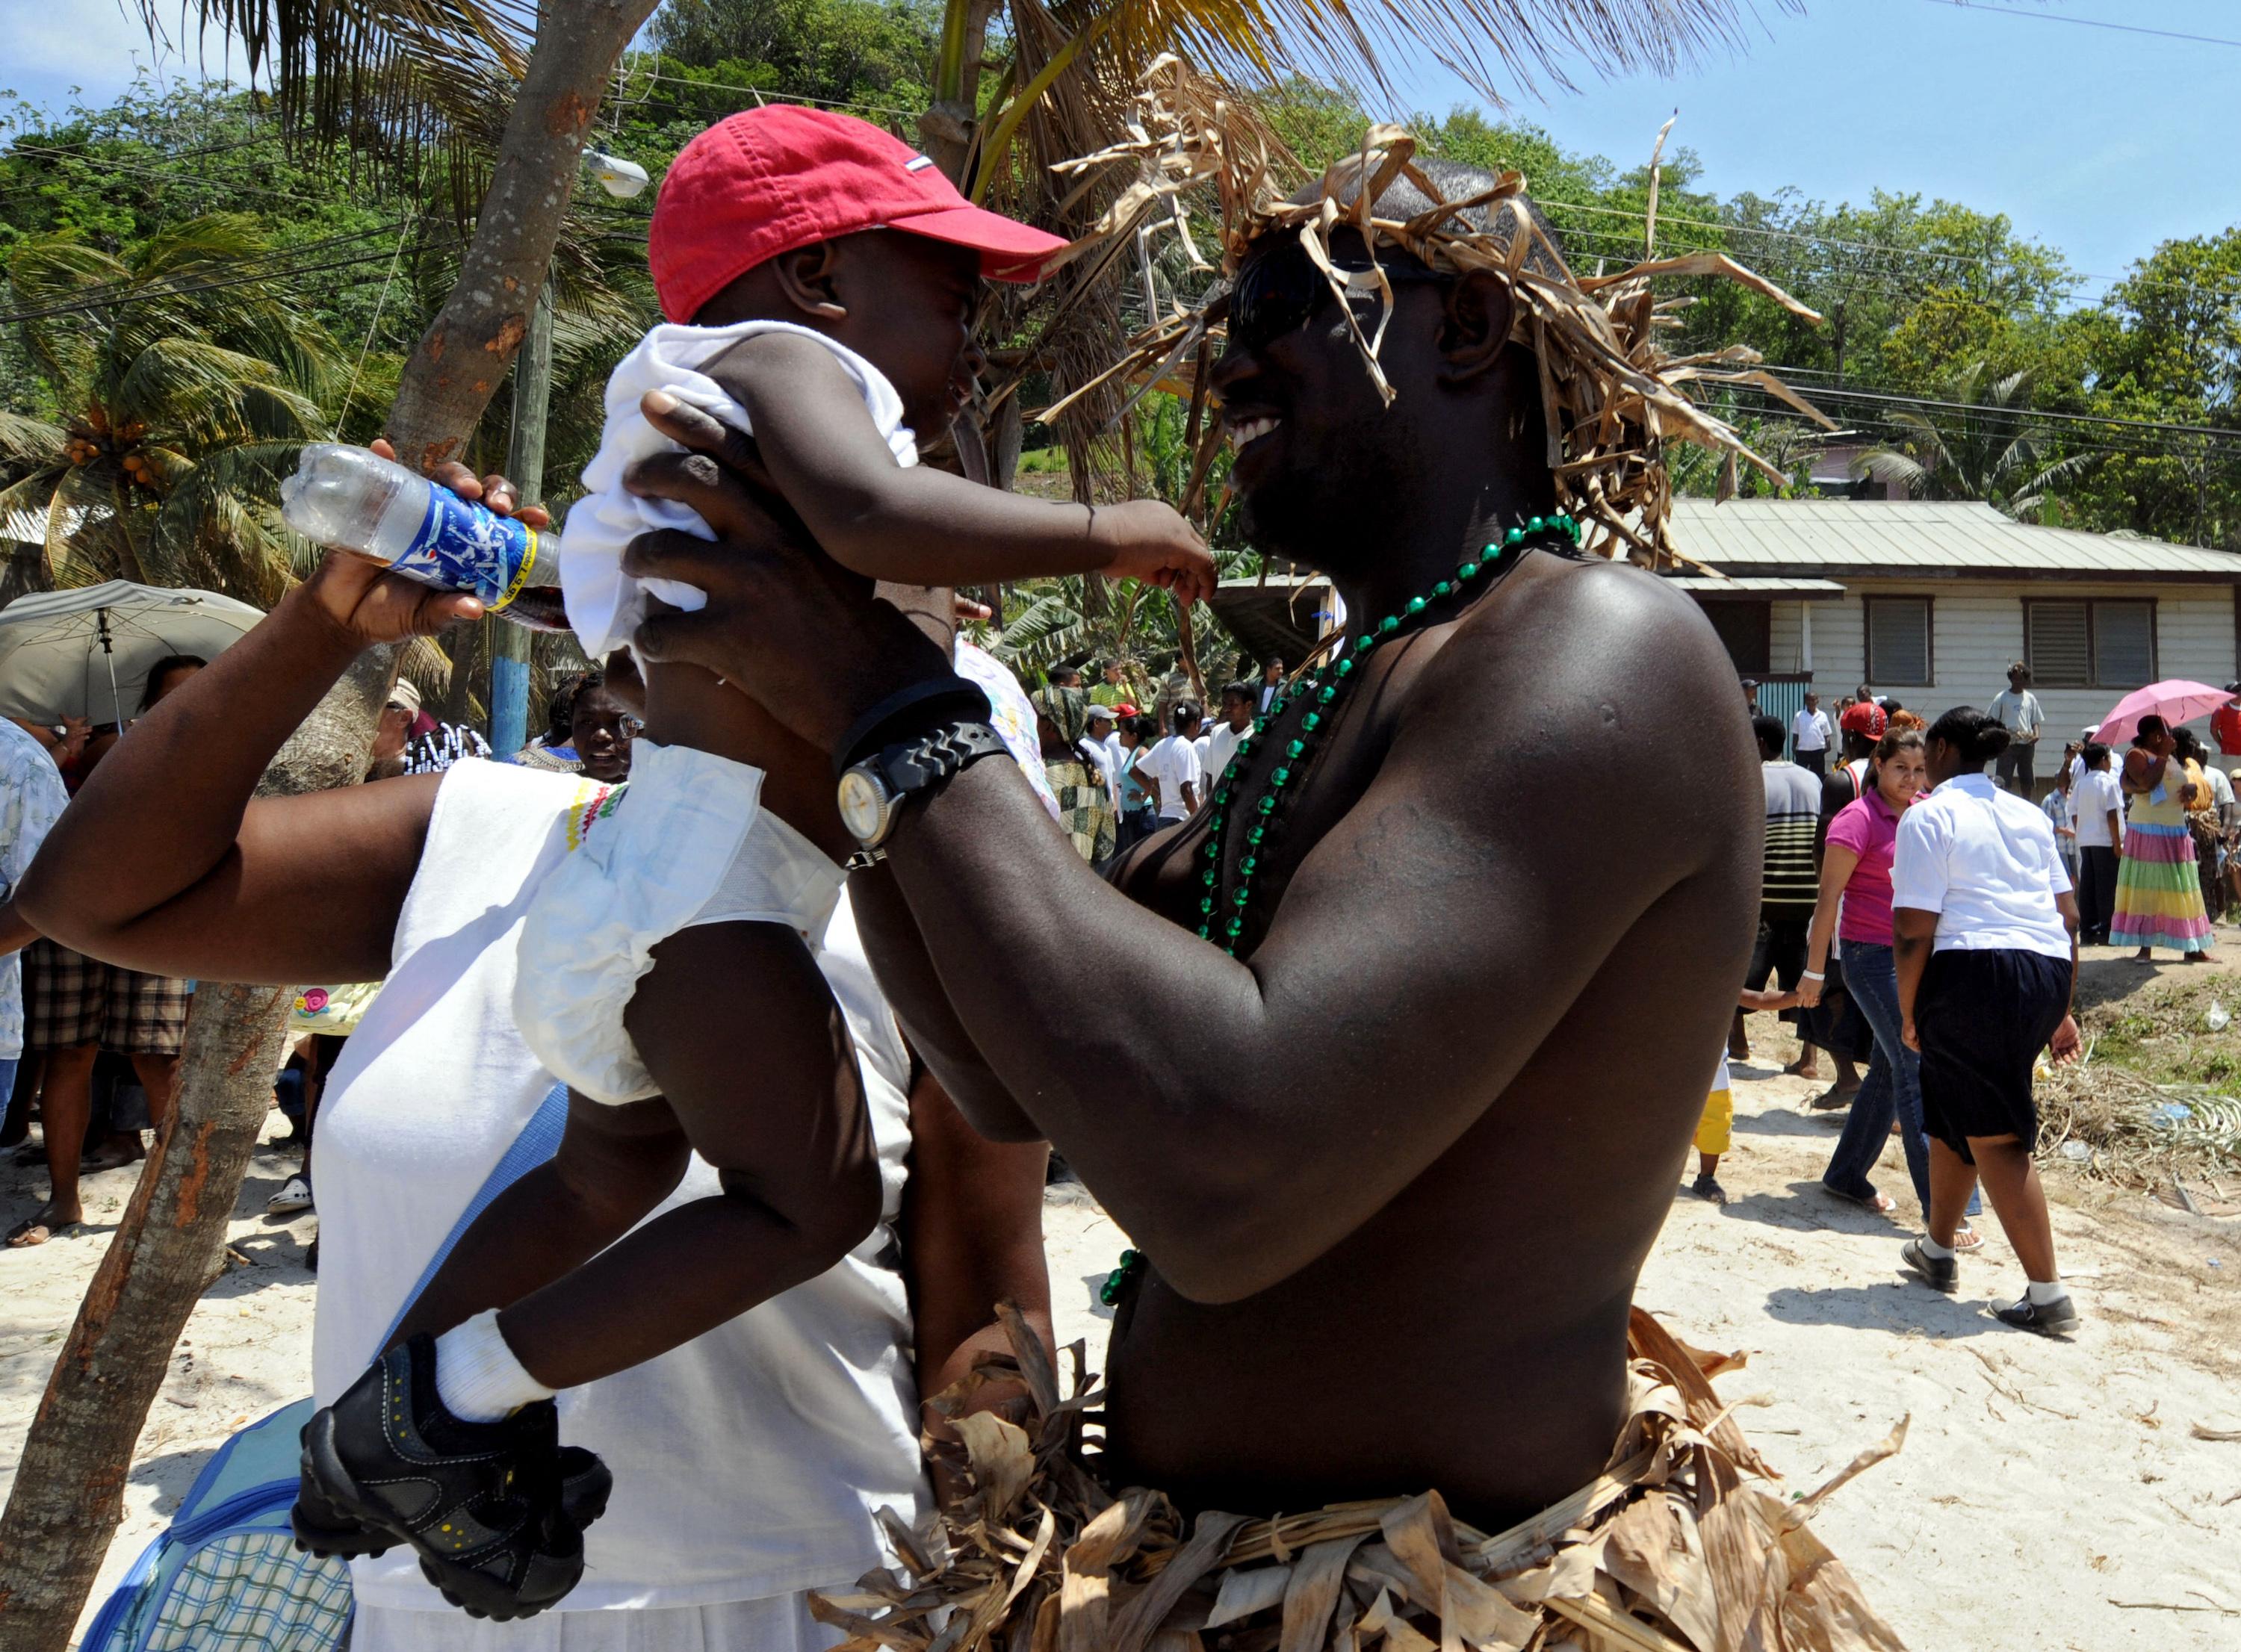 A Garifuna man holds his baby during a ceremony to commemorate 211 years since their arrival to Punta Gorda from St. Vincent on April 12 2008 in Roatan, department of Bahia Islands, Honduras. At the time, the Garifuna people were demanding productive projects from the government of then-head of state Manuel Zelaya, husband of current President Xiomara Castro, to contribute to the development of their community. Photo: Orlando Sierra/AFP